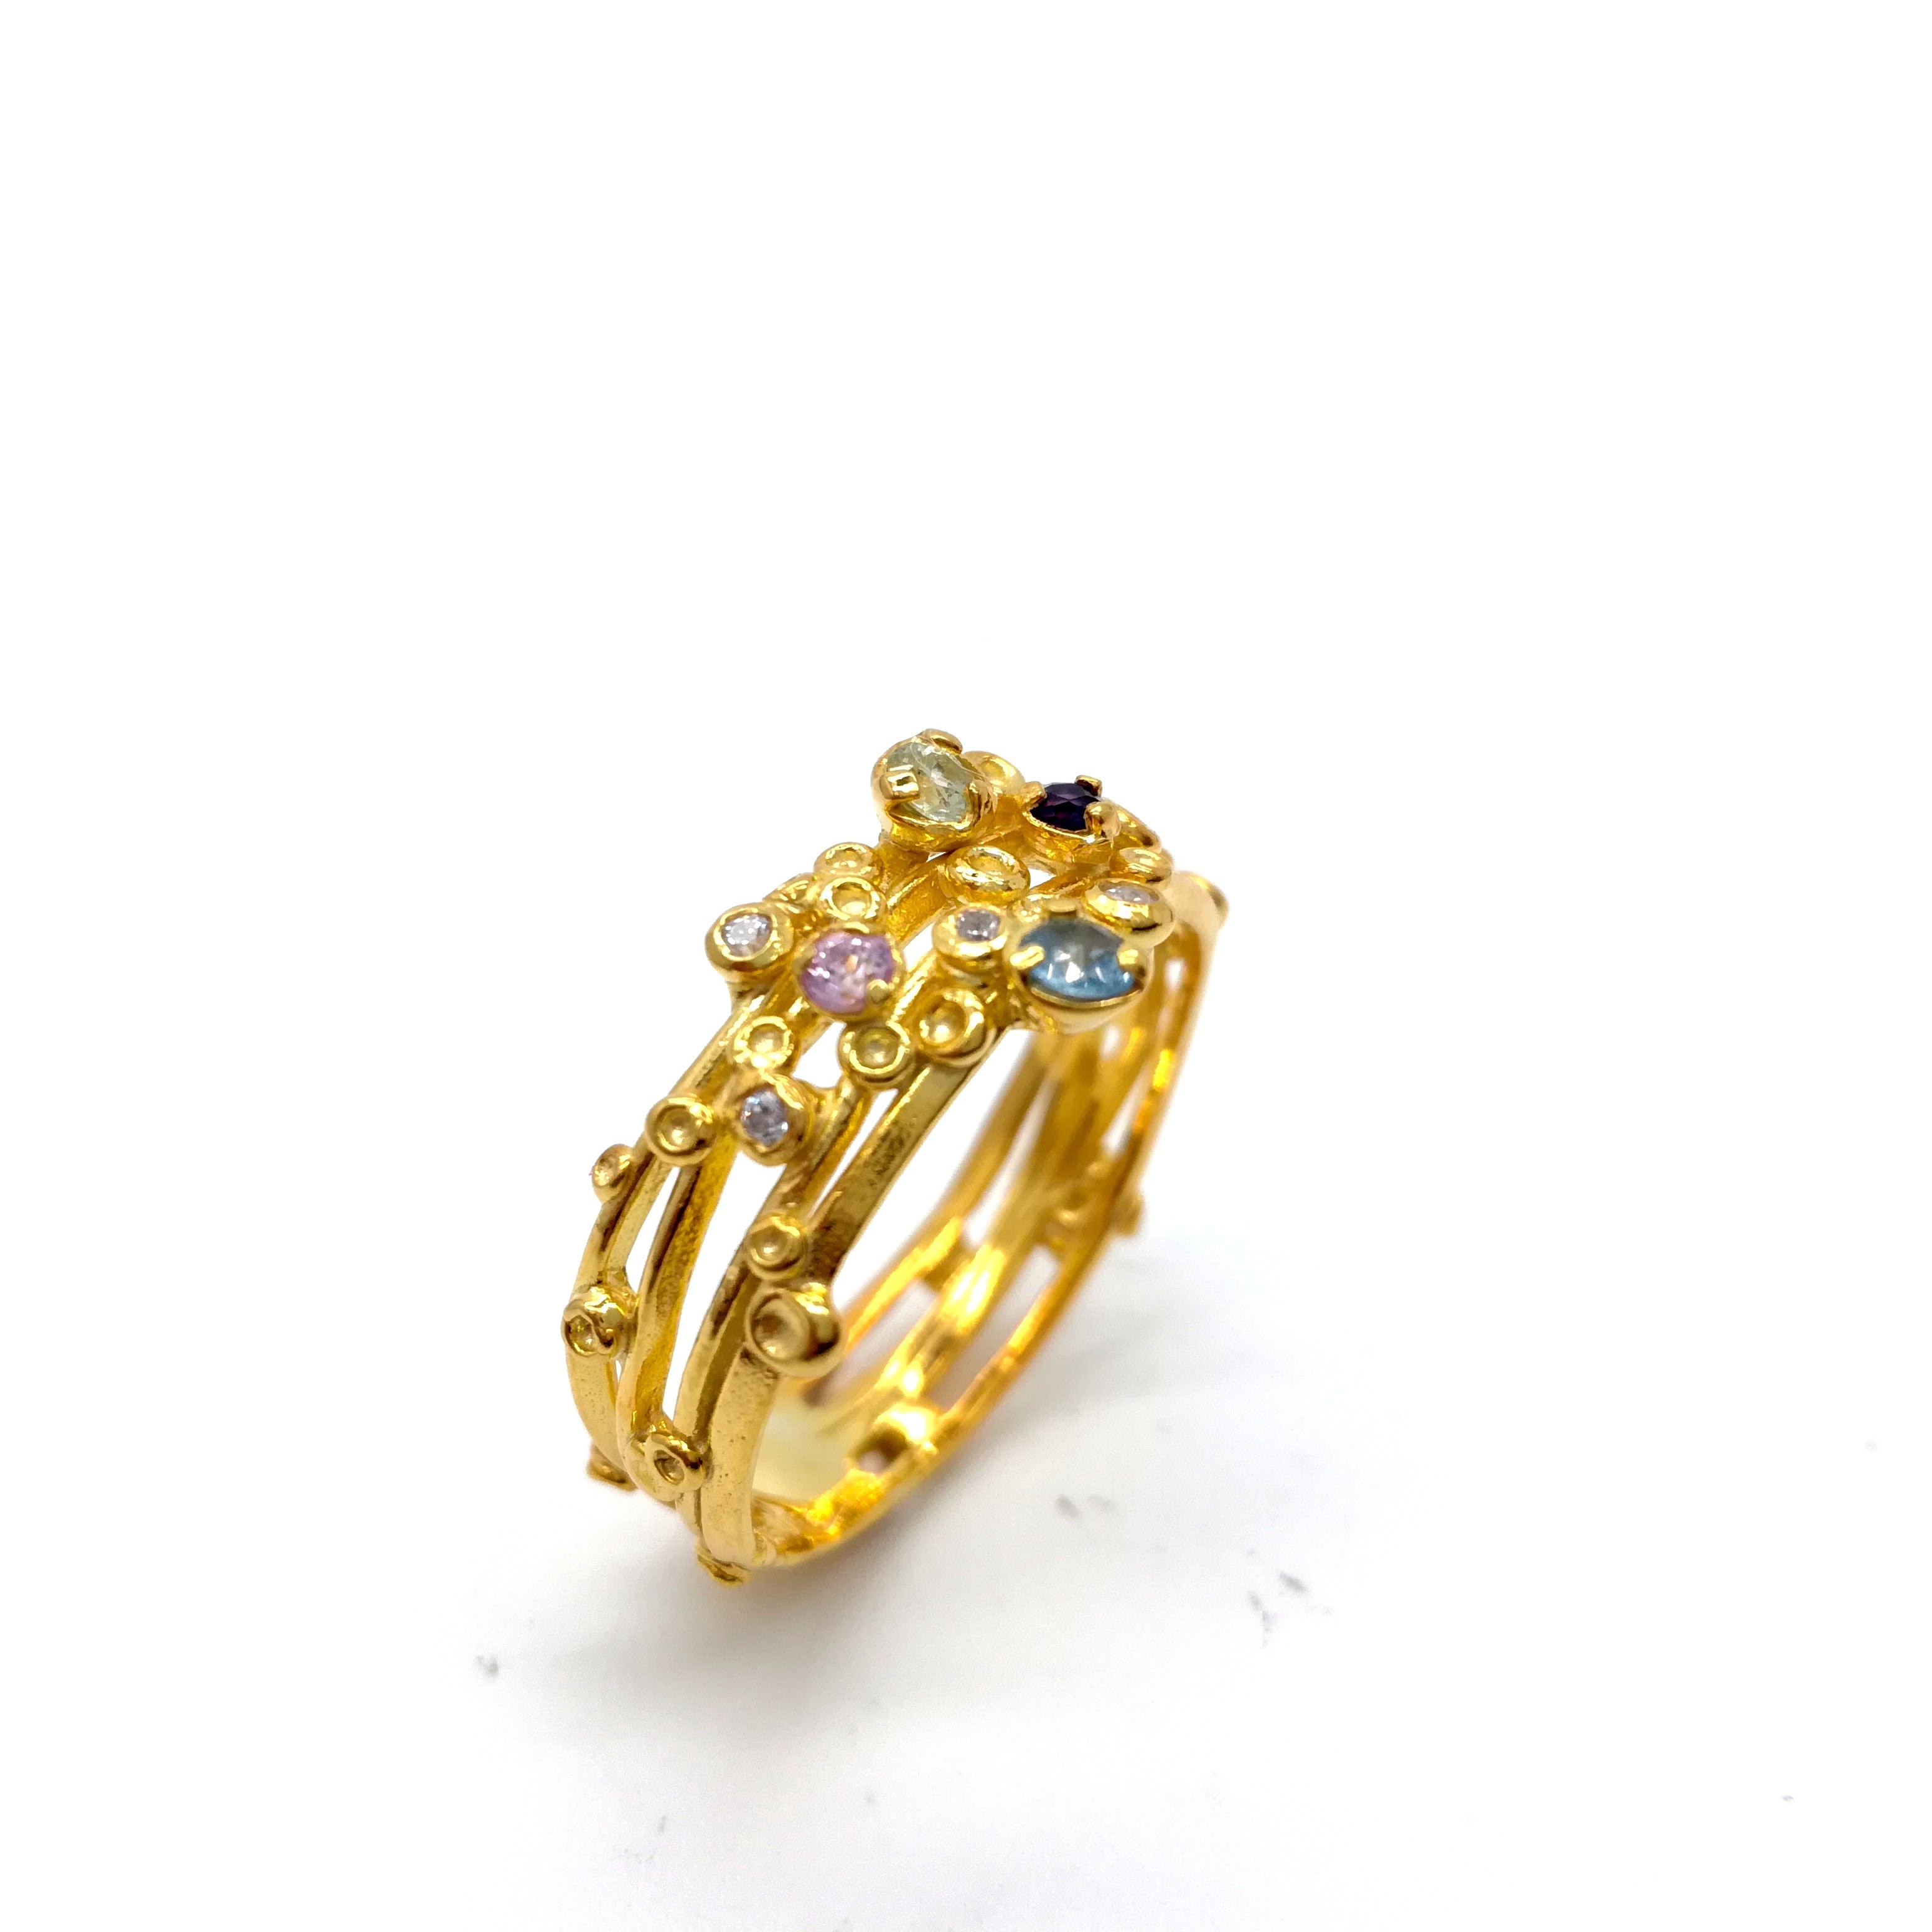 Gold ring 14K or 18K with synthetic stones or diamonds brilliant cut and semiprecious stones